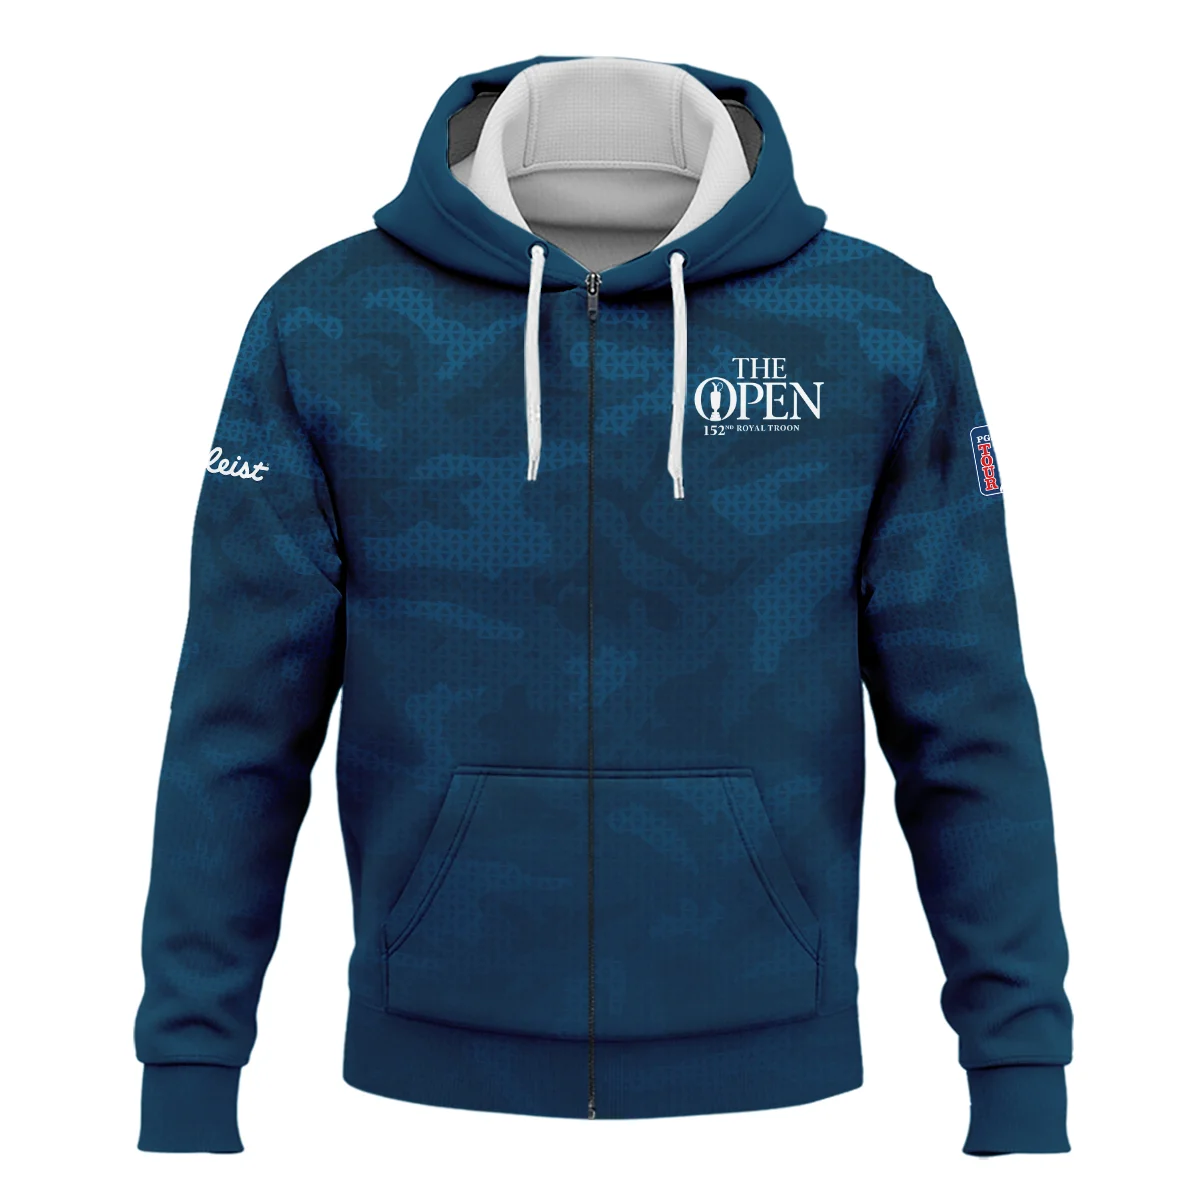 Titleist 152nd Open Championship Dark Blue Abstract Background Performance Quarter Zip Sweatshirt With Pockets All Over Prints HOTOP260624A02TLTS